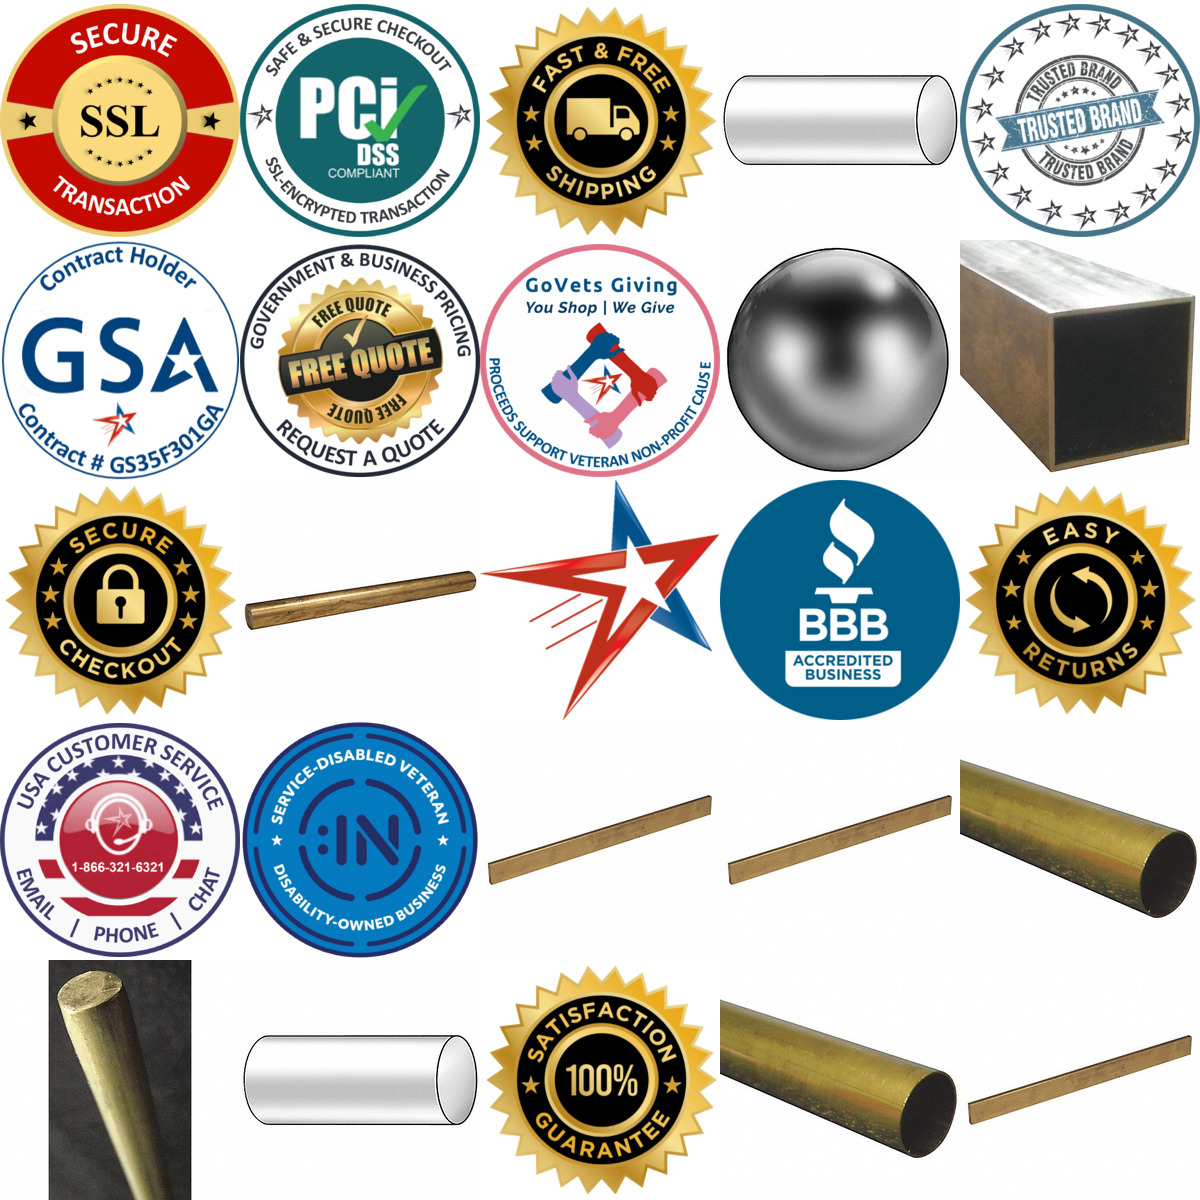 A selection of Brass products on GoVets